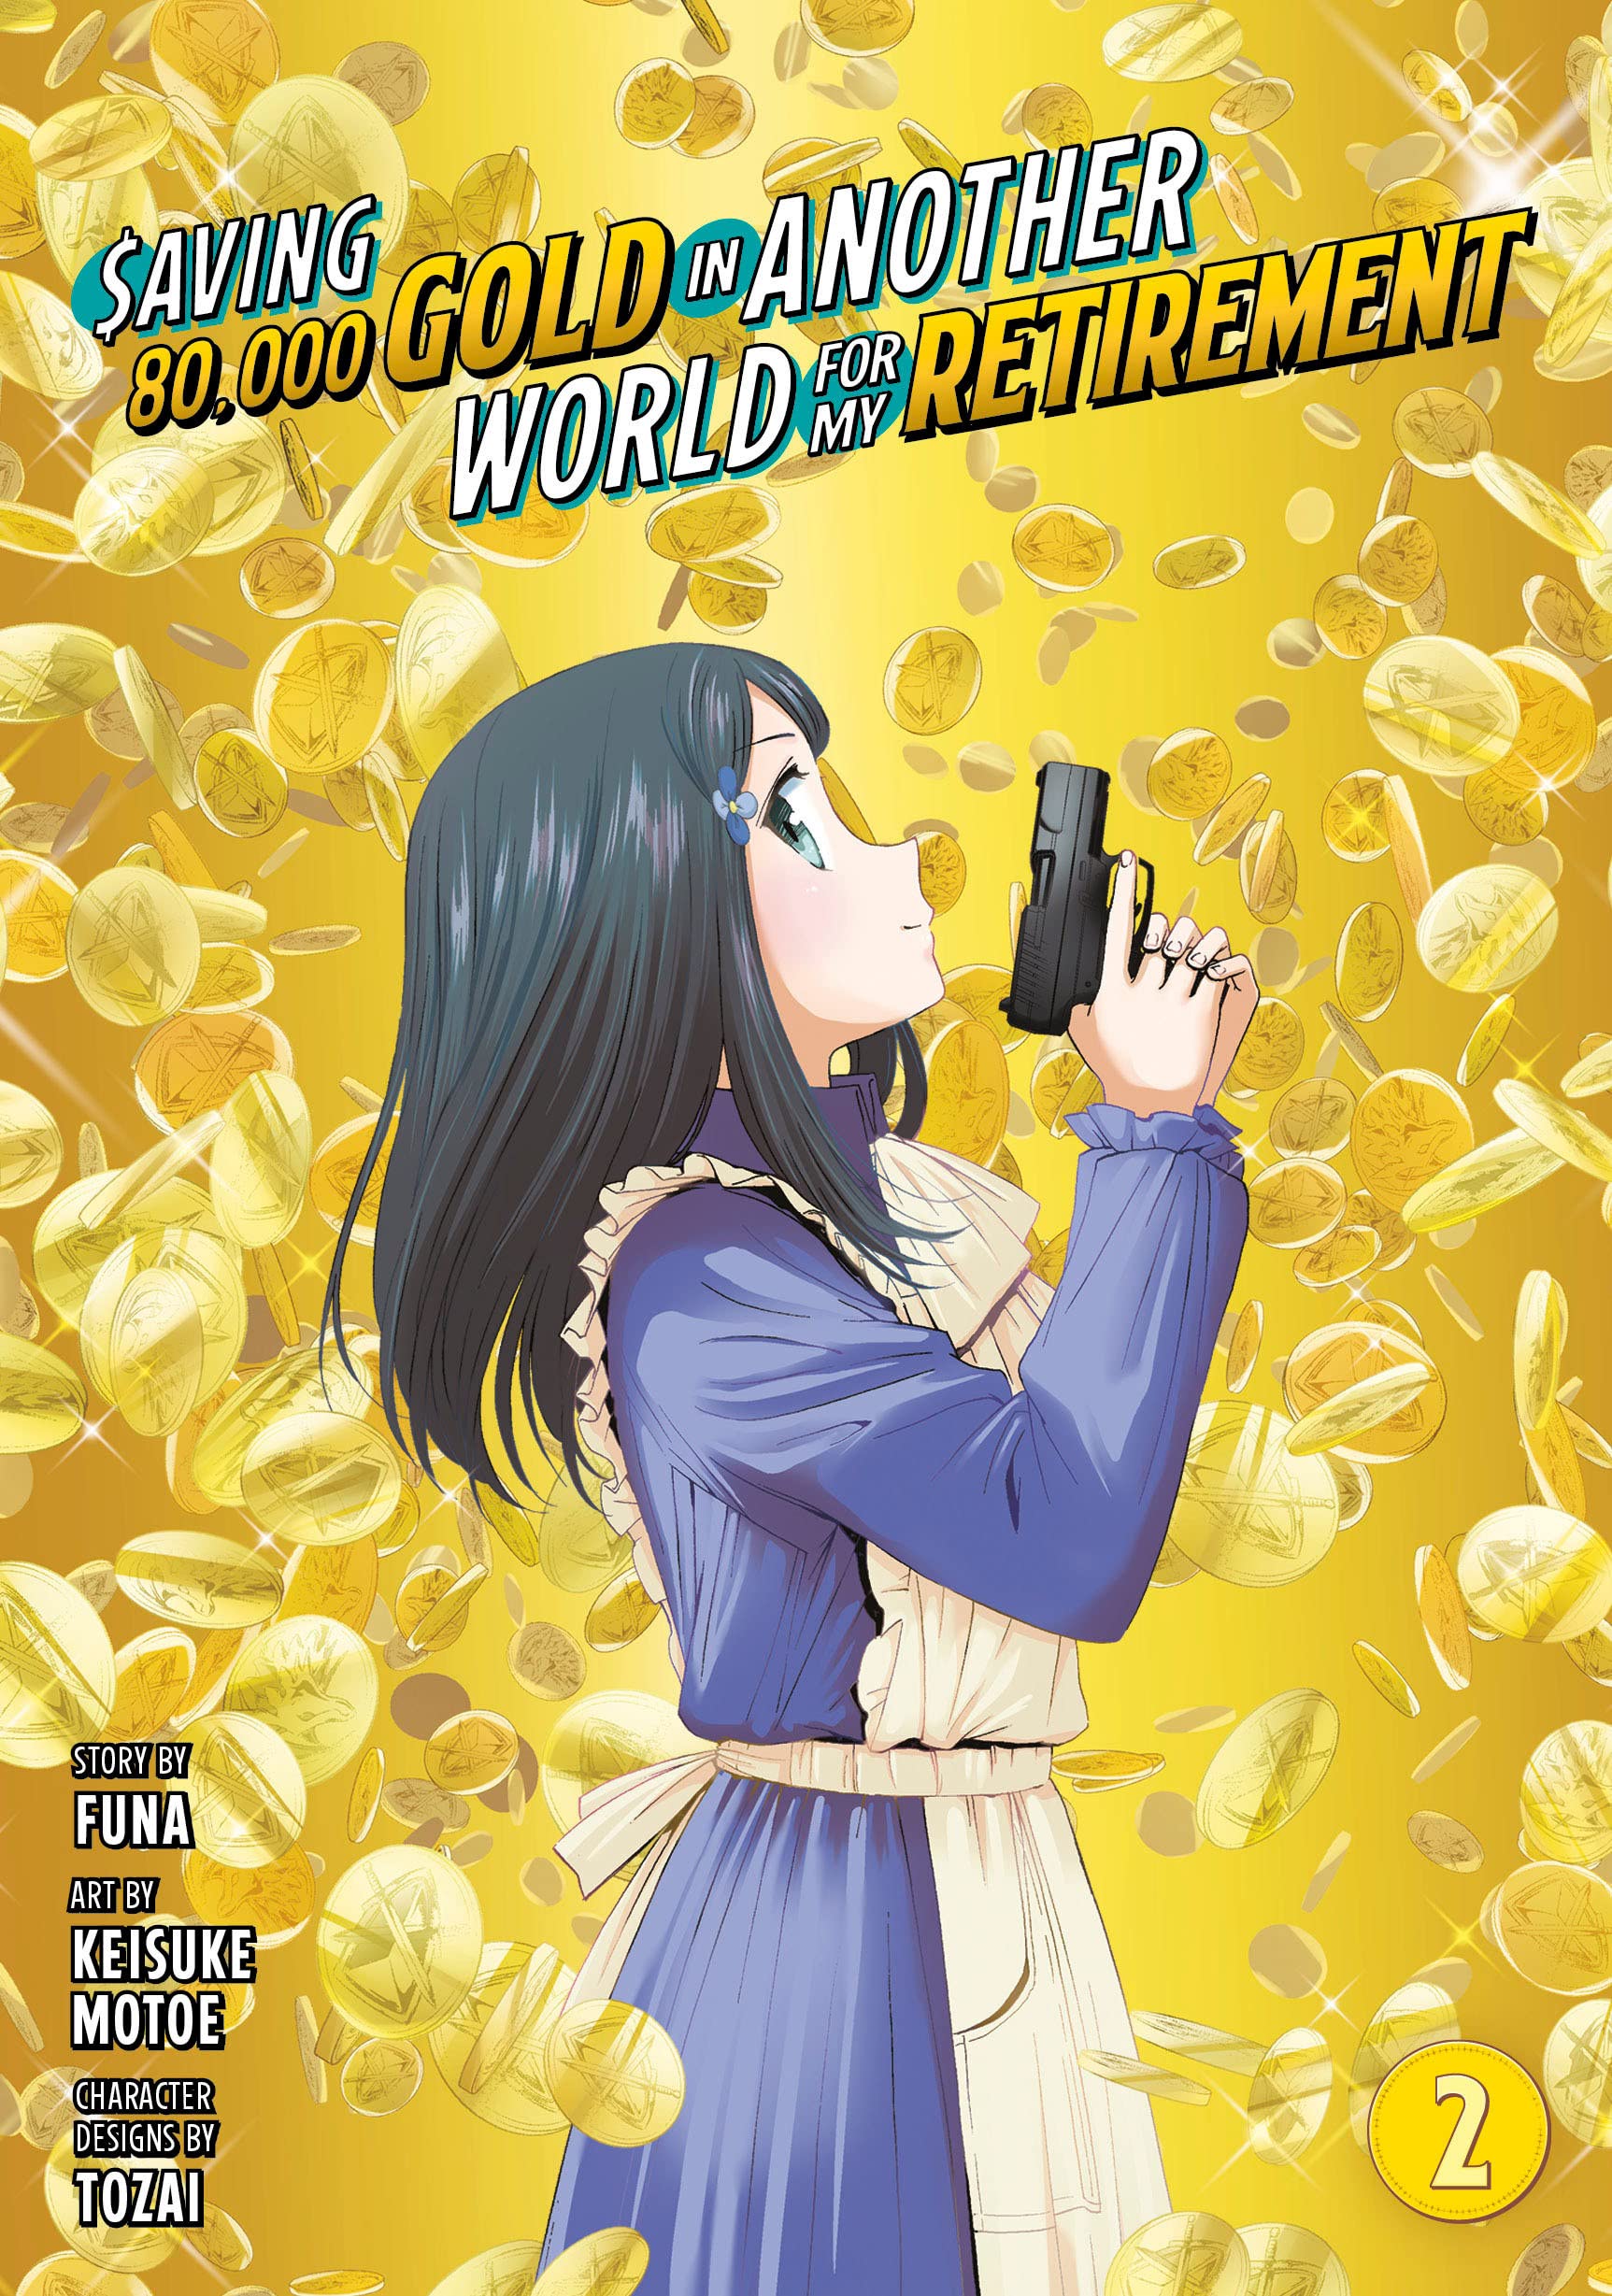 Saving 80,000 Gold in Another World for My Retirement (Manga) Vol. 02